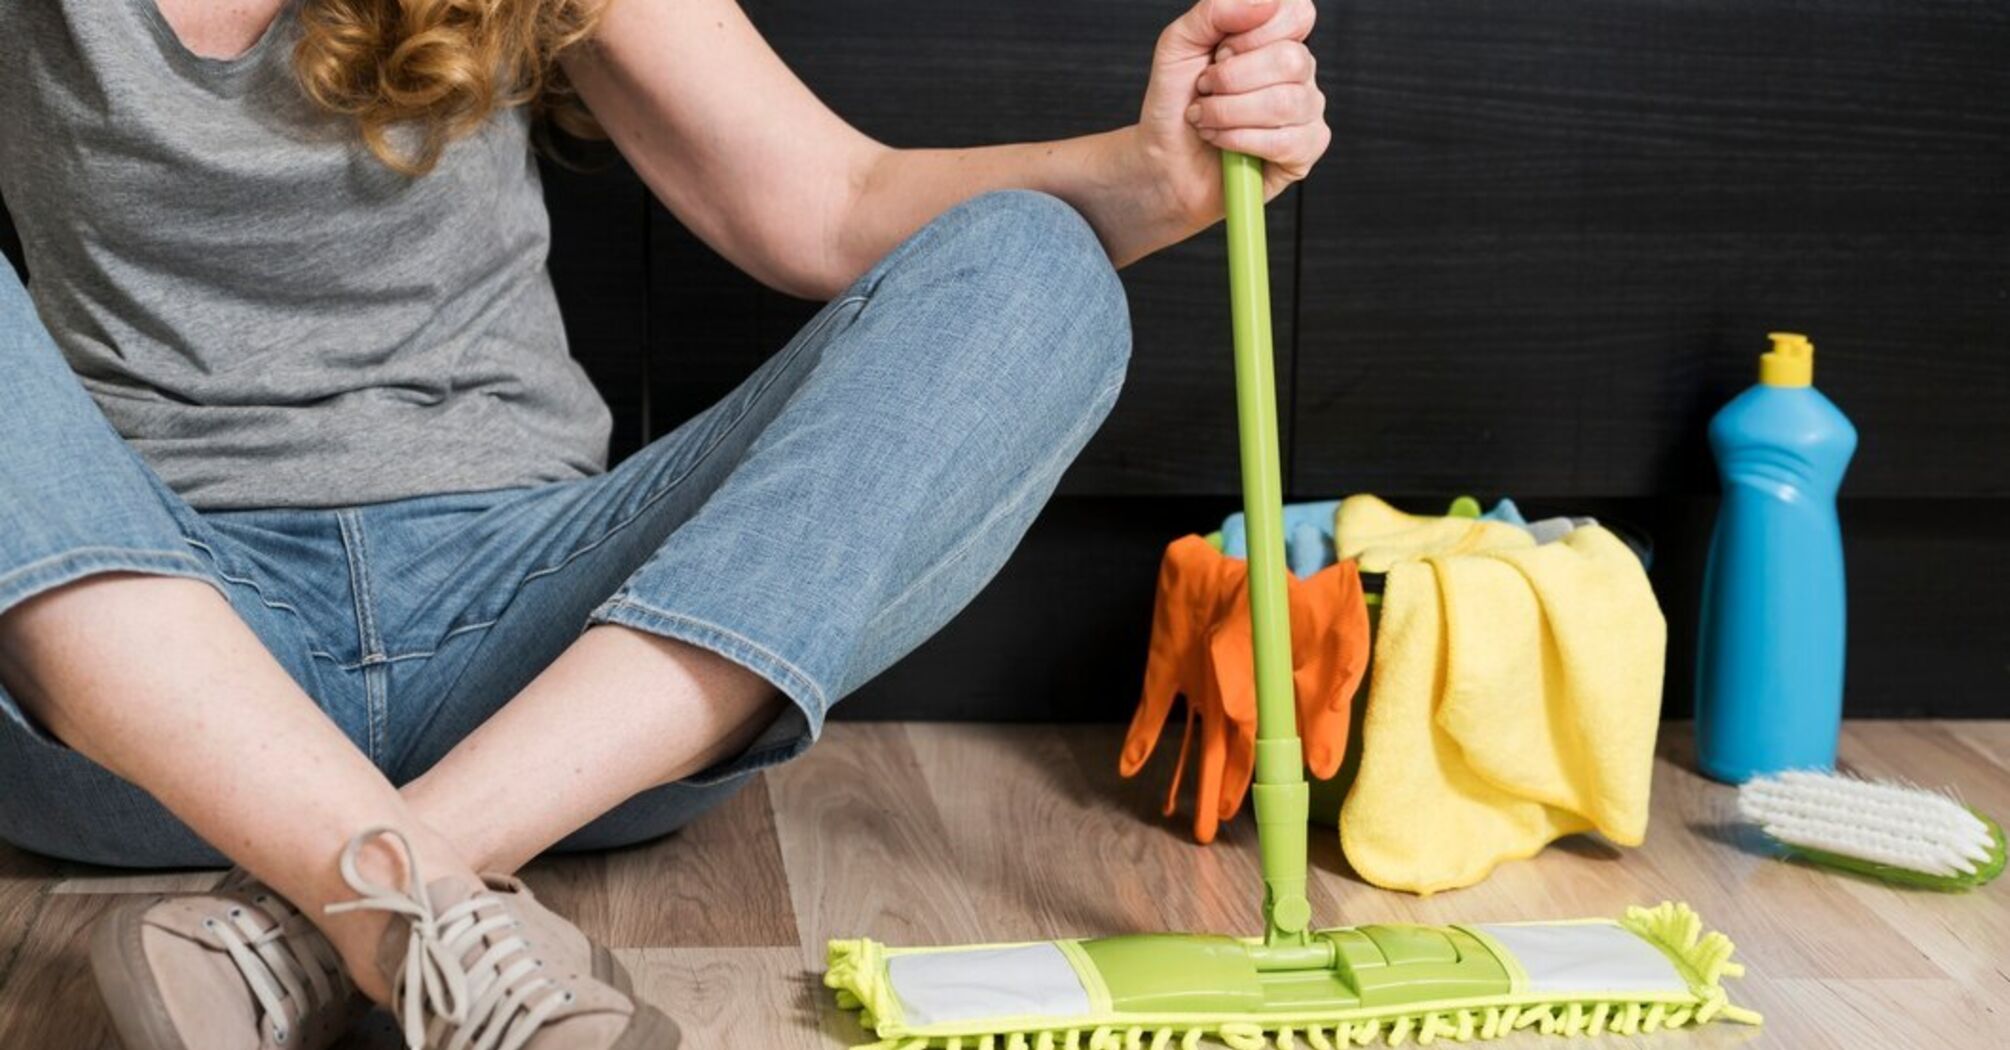 How to effectively keep your house clean: 4 simple tips